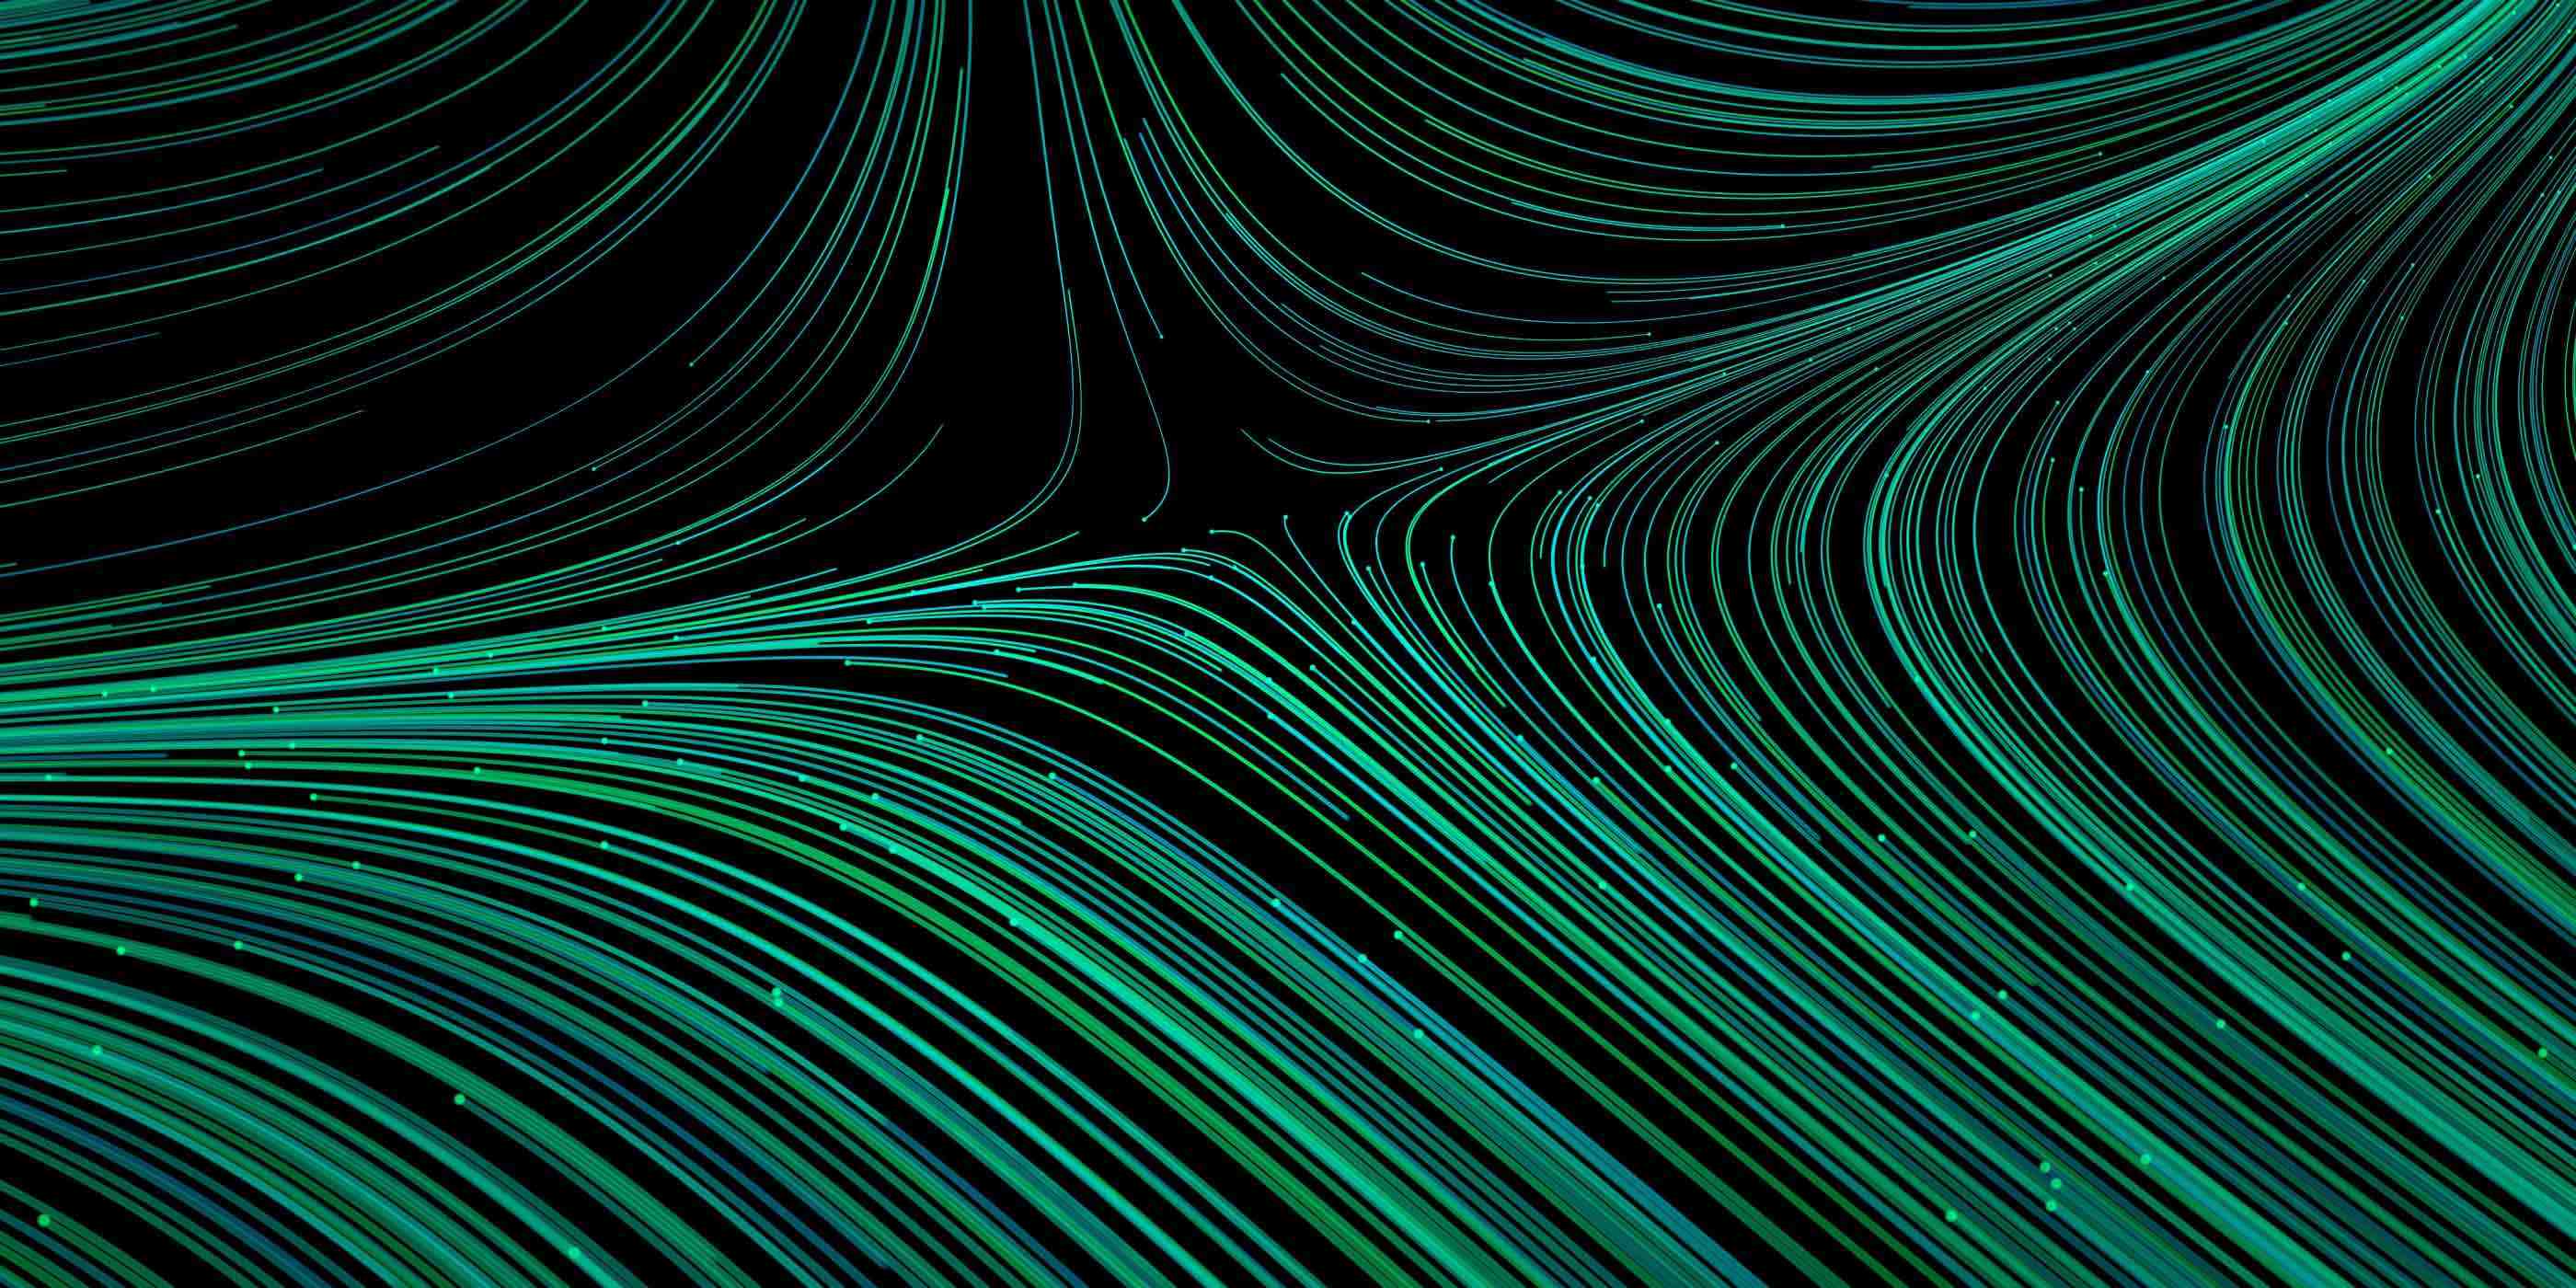 Abstract image with green light lines against a dark background.